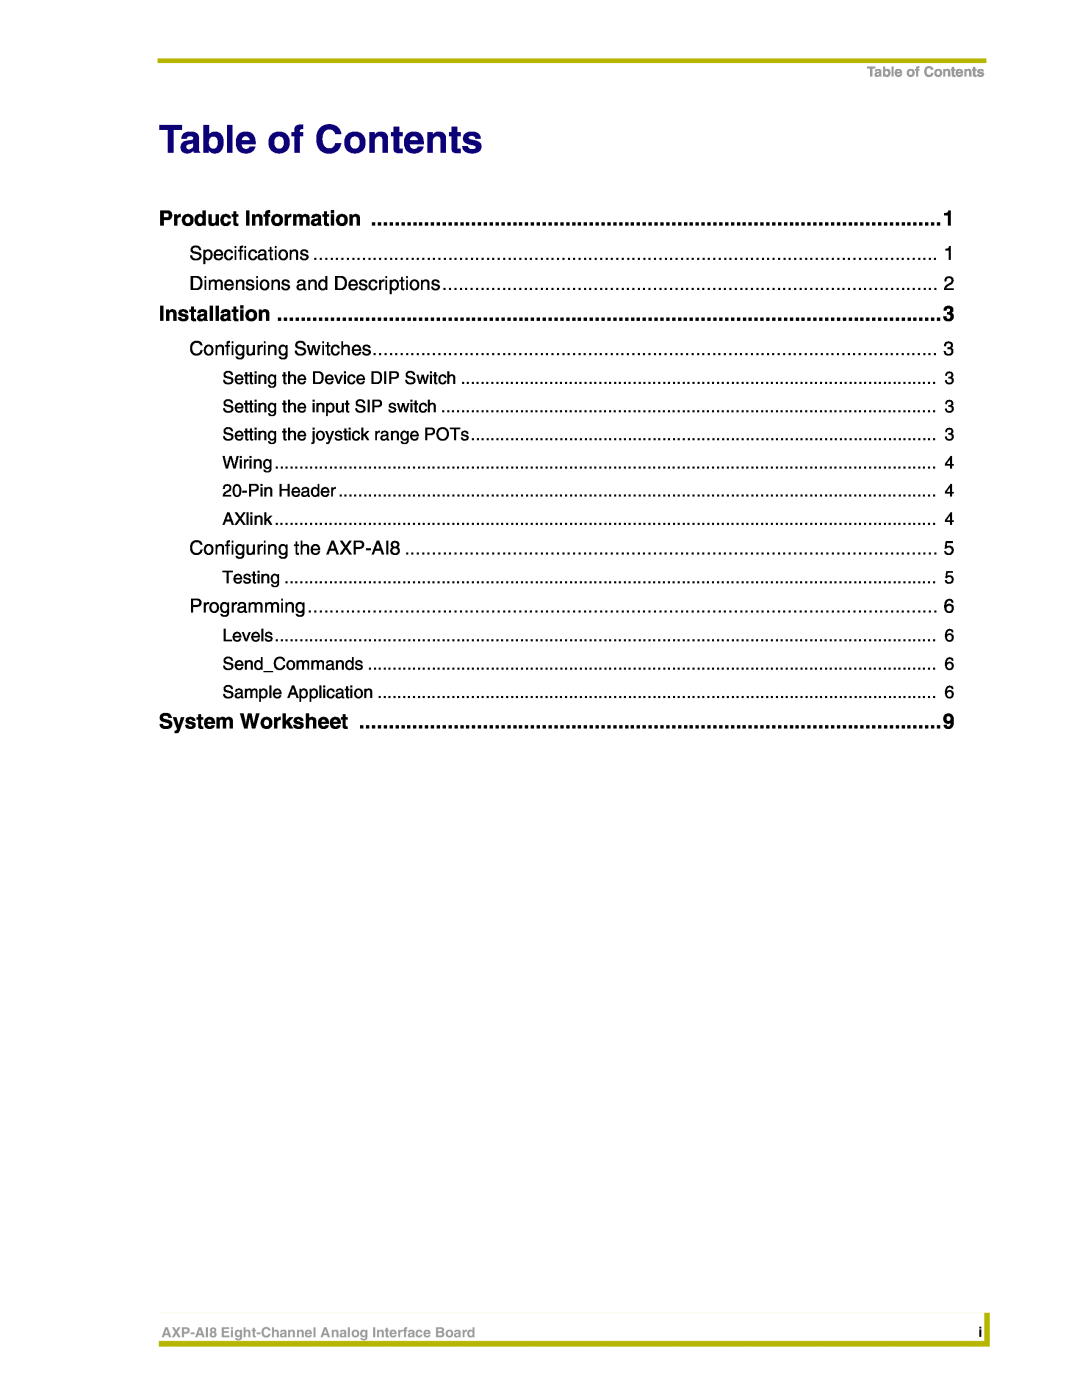 AMX AXP-AI8 instruction manual Table of Contents, Product Information, Installation, System Worksheet 